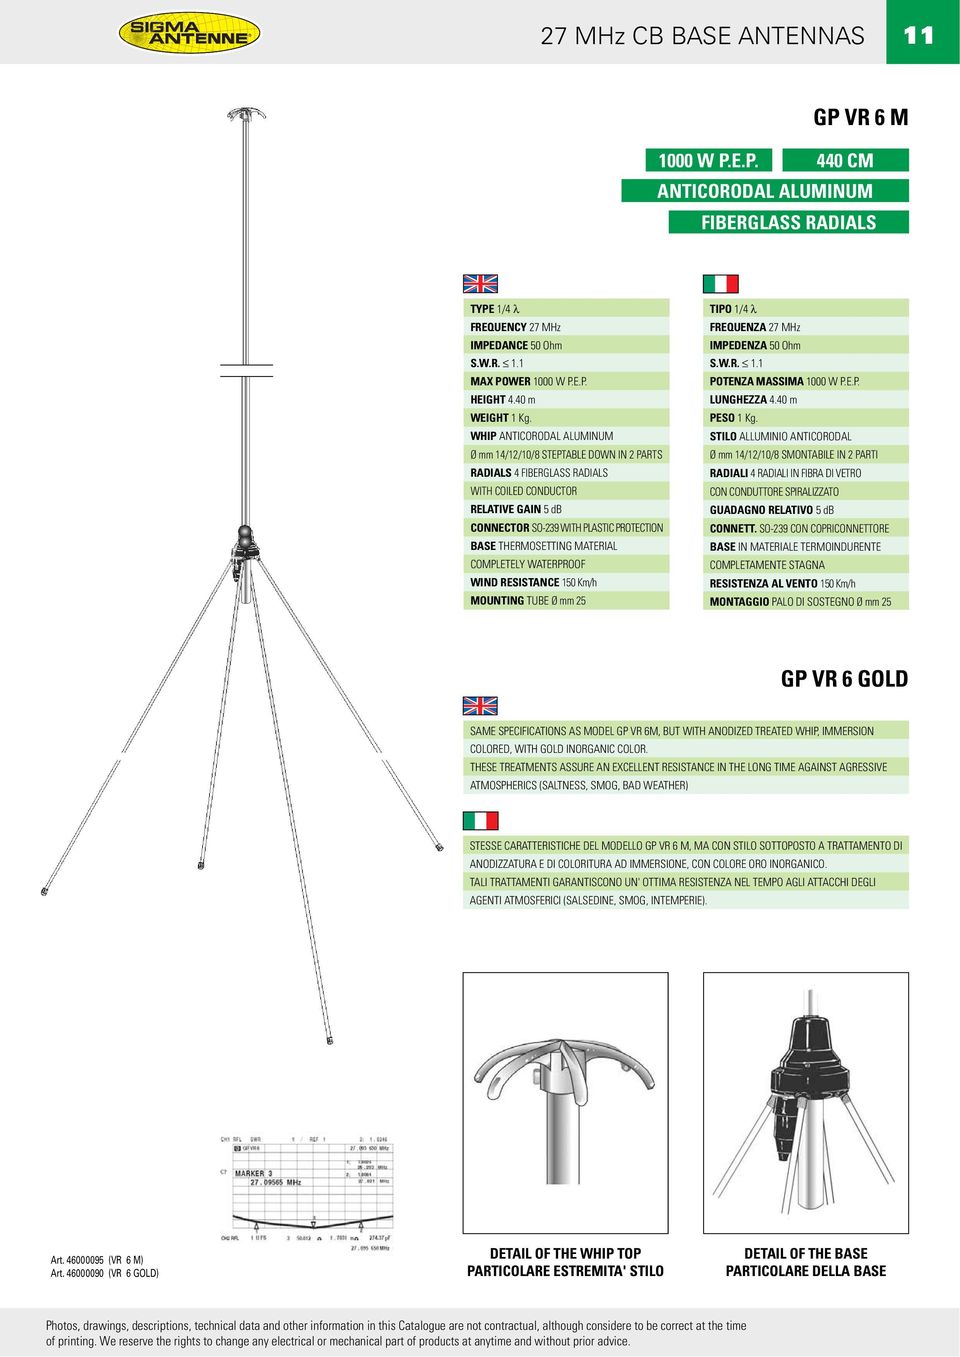 MATERIAL COMPLETELY WATERPROOF WIND RESISTANCE 150 Km/h MOUNTING TUBE Ø mm 25 TIPO 1/4 λ S.W.R. 1.1 POTENZA MASSIMA 1000 W P.E.P. LUNGHEZZA 4.40 m PESO 1 Kg.